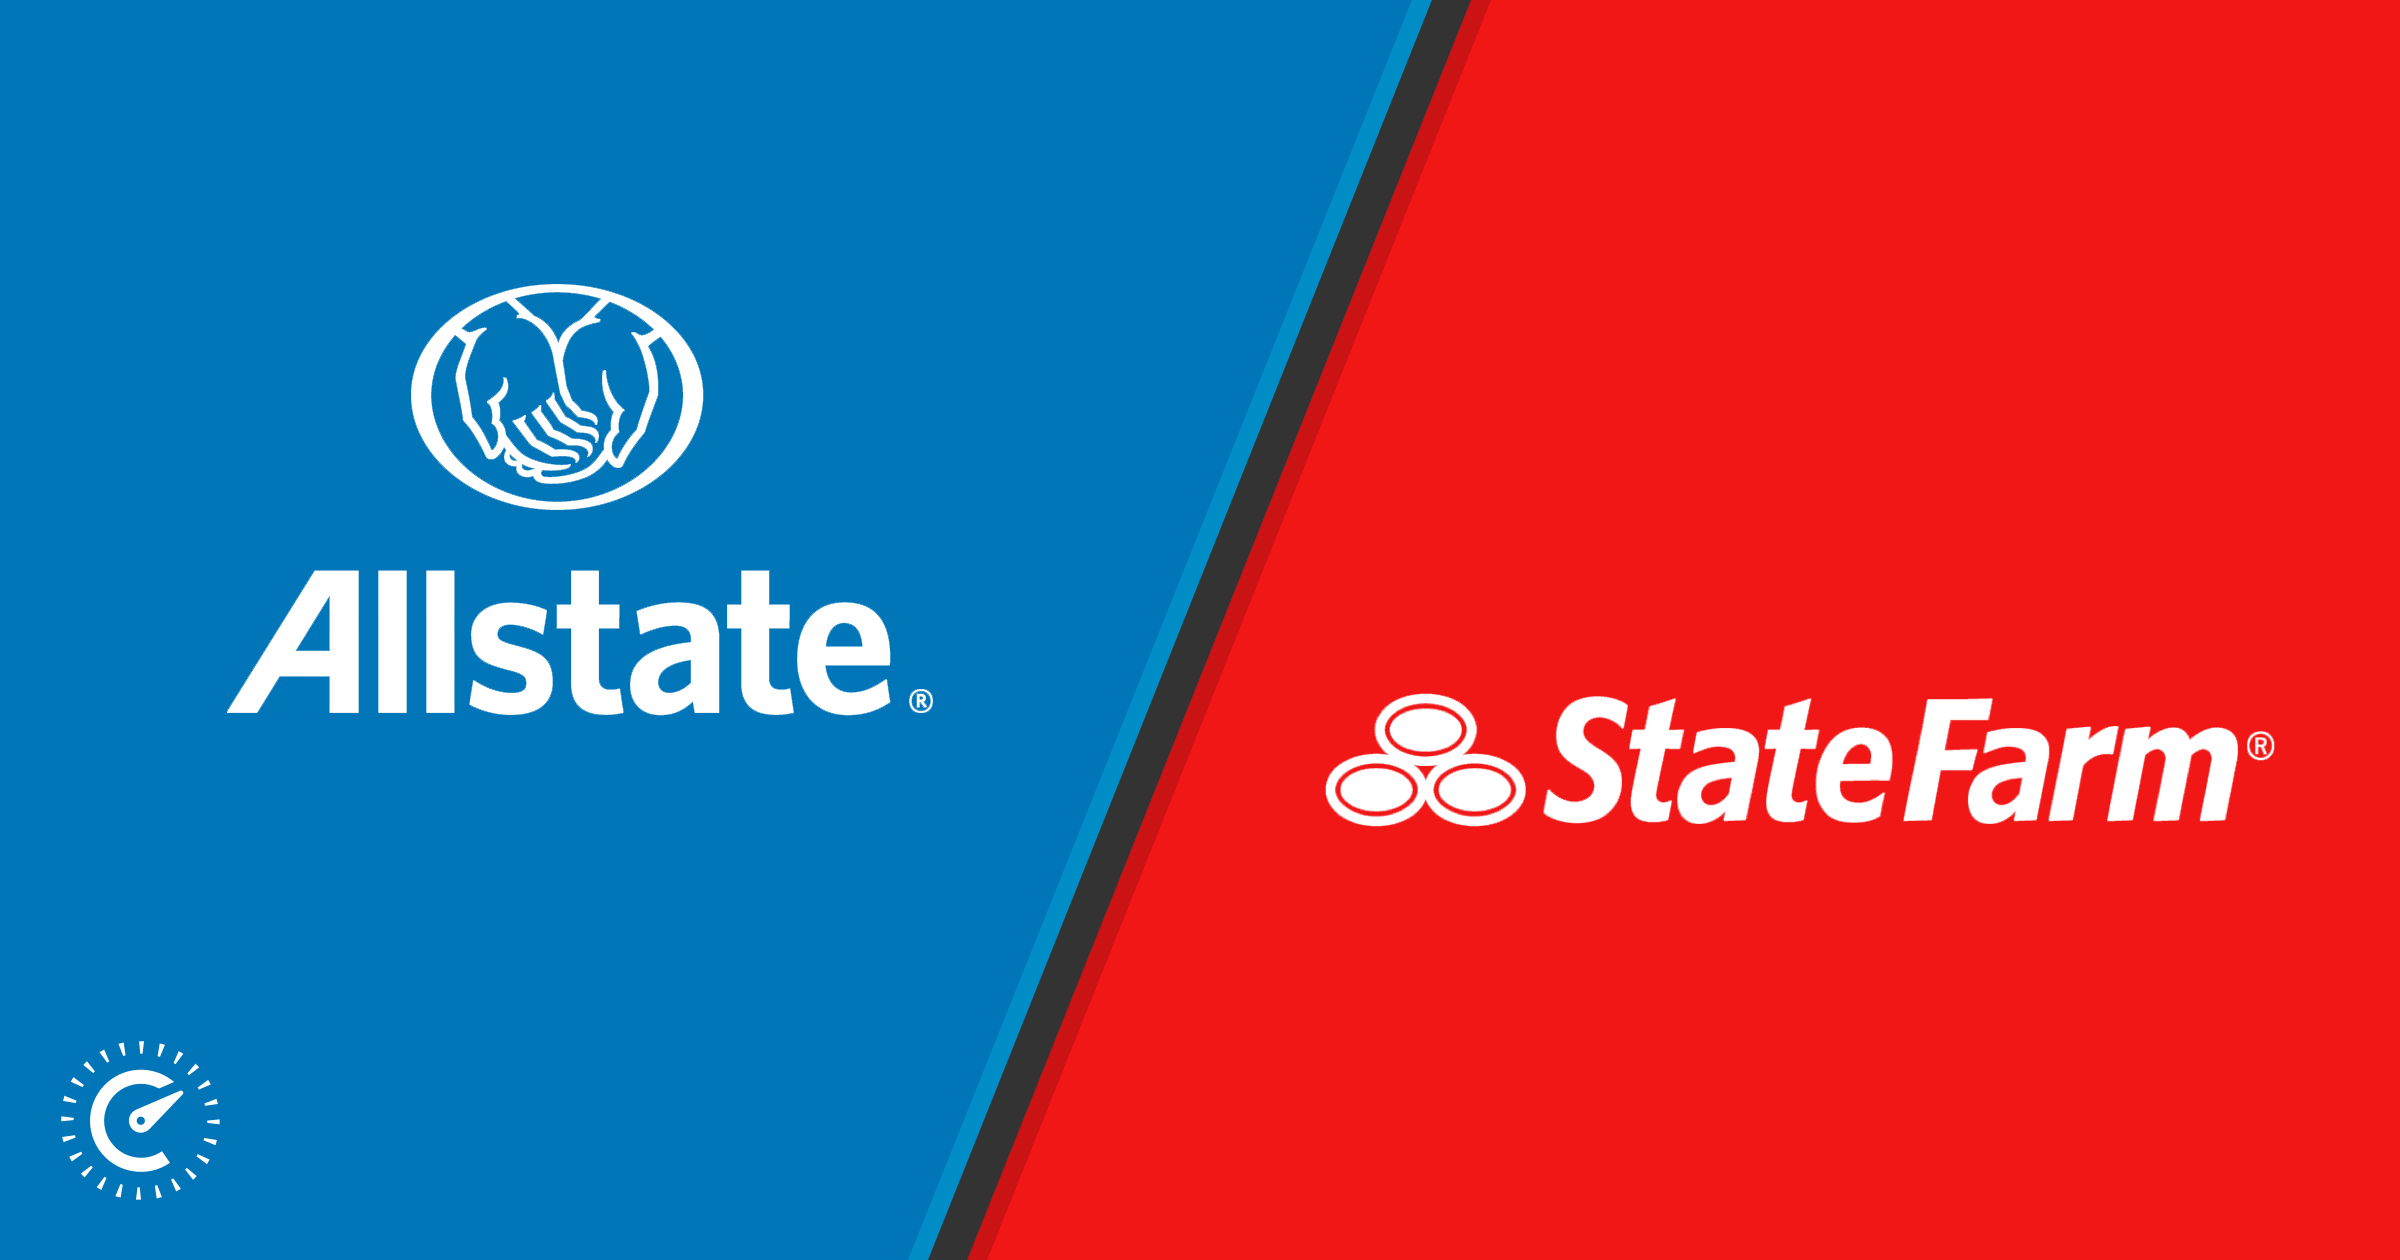 Allstate Vs State Farm Consumer Ratings And Rates inside measurements 2400 X 1260